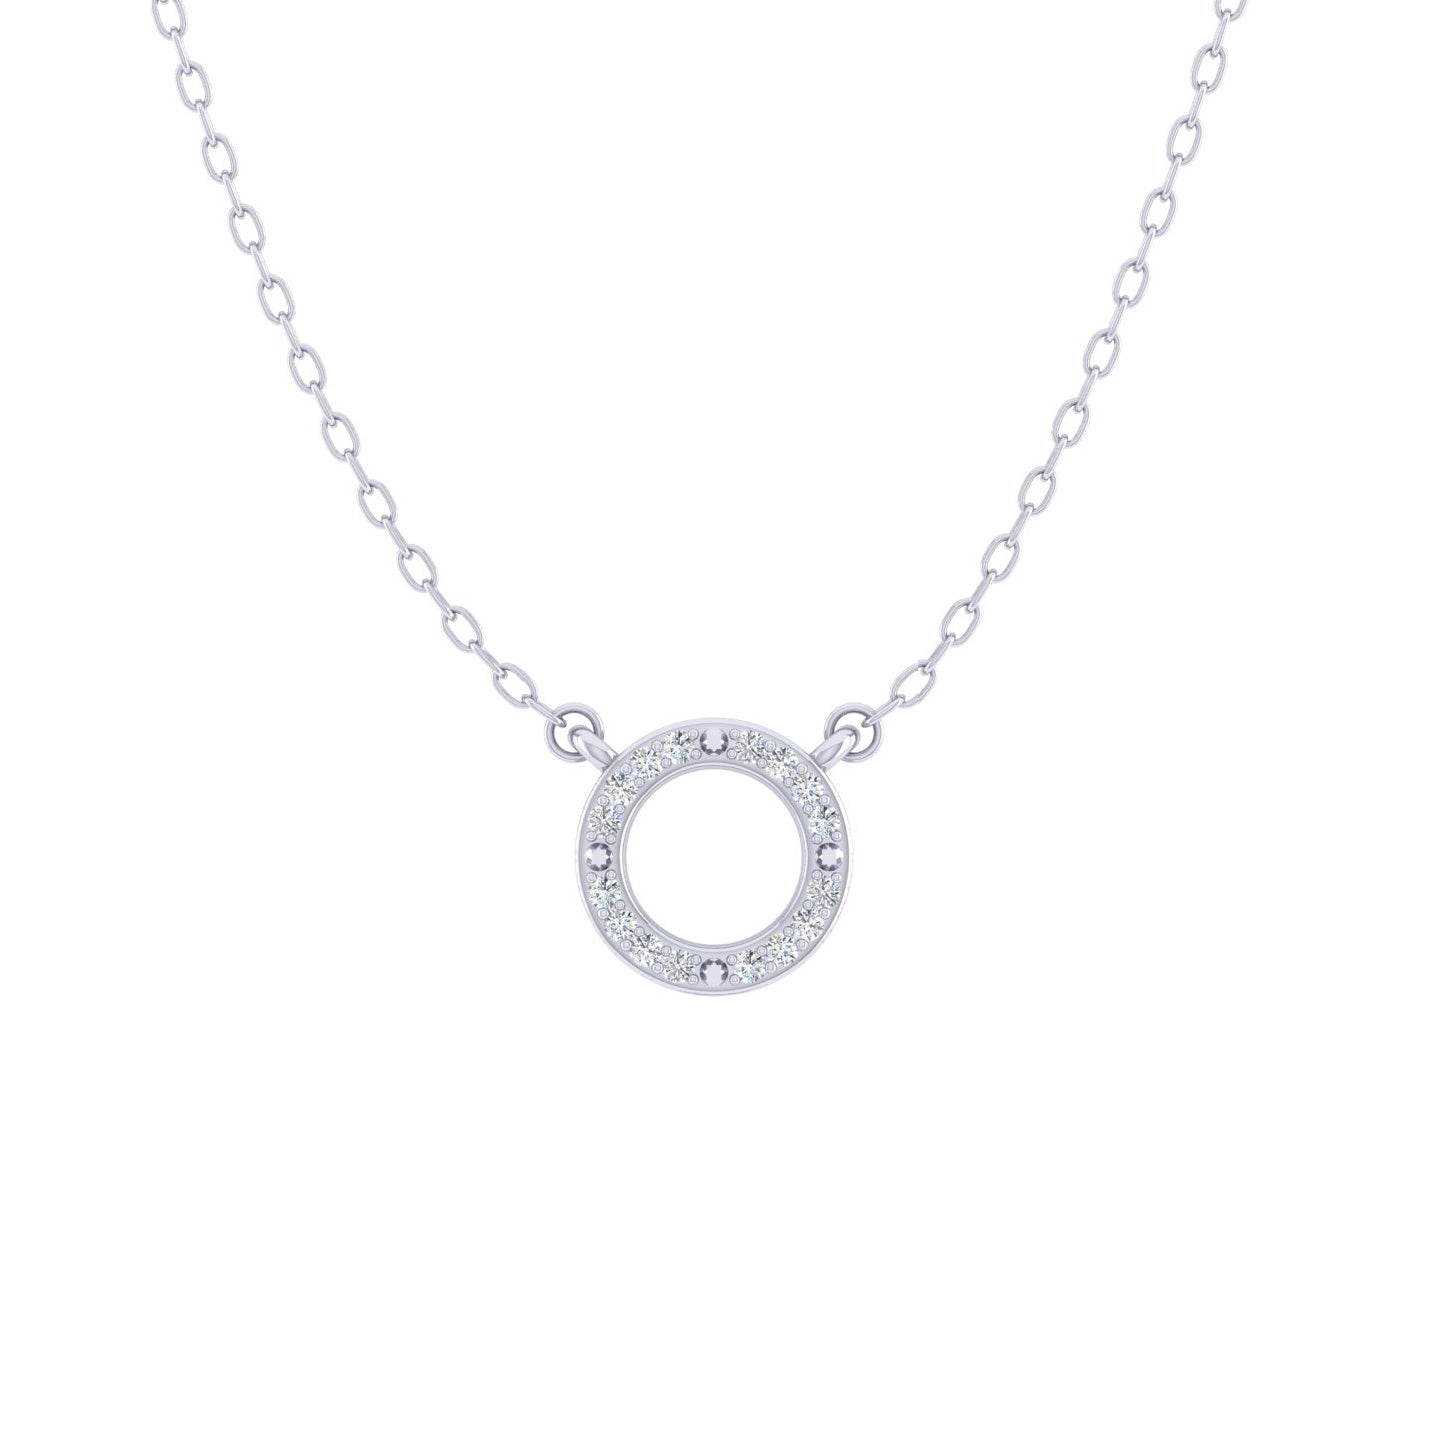 Circle of Life 1/20 Cttw Natural Diamond Pendant Necklace set in 925 Sterling Silver